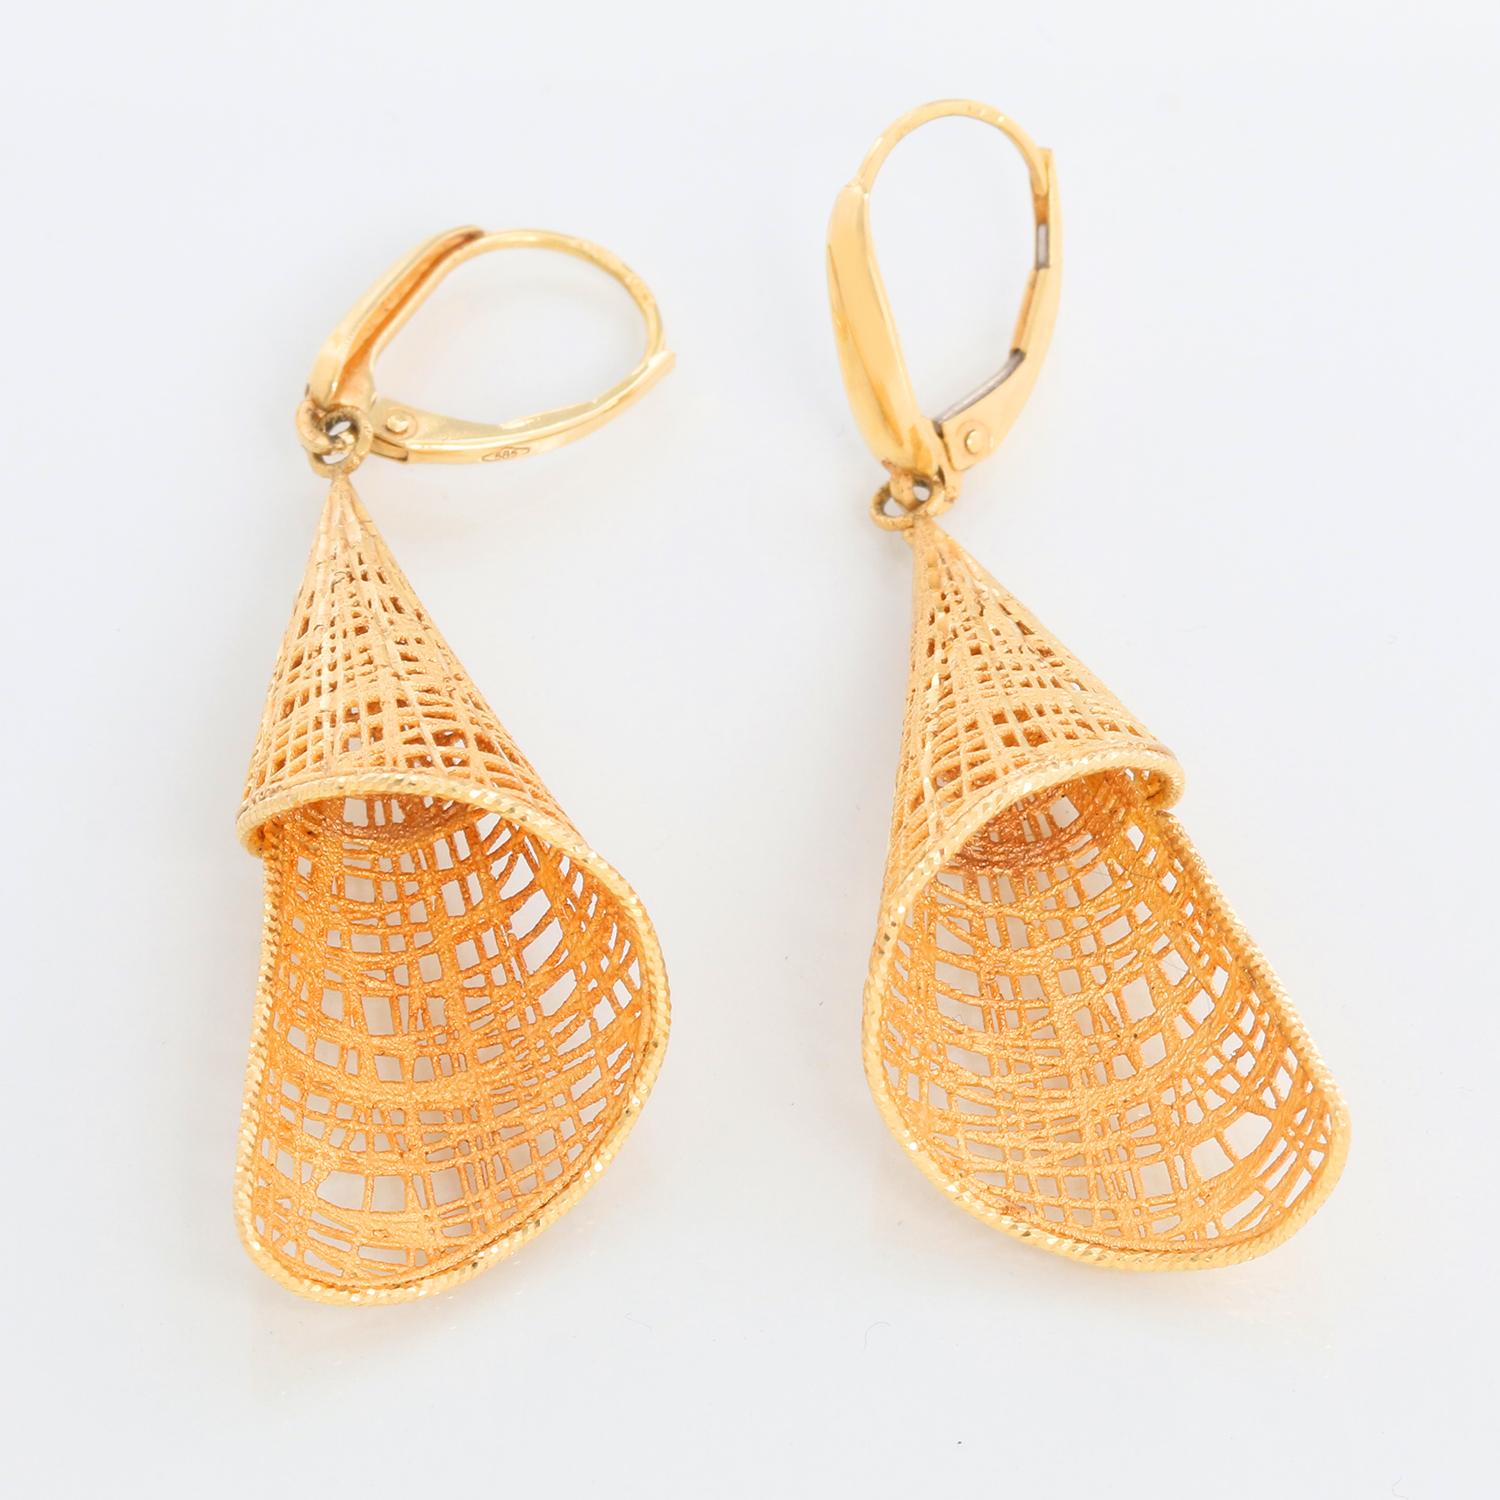 14K Yellow Gold Woven Twirl Earrings  - Unique woven gold drop earrings. Measuring 2 inches in height. Hallmarks include 14K & ITALY. Pre-owned with custom earrings box .